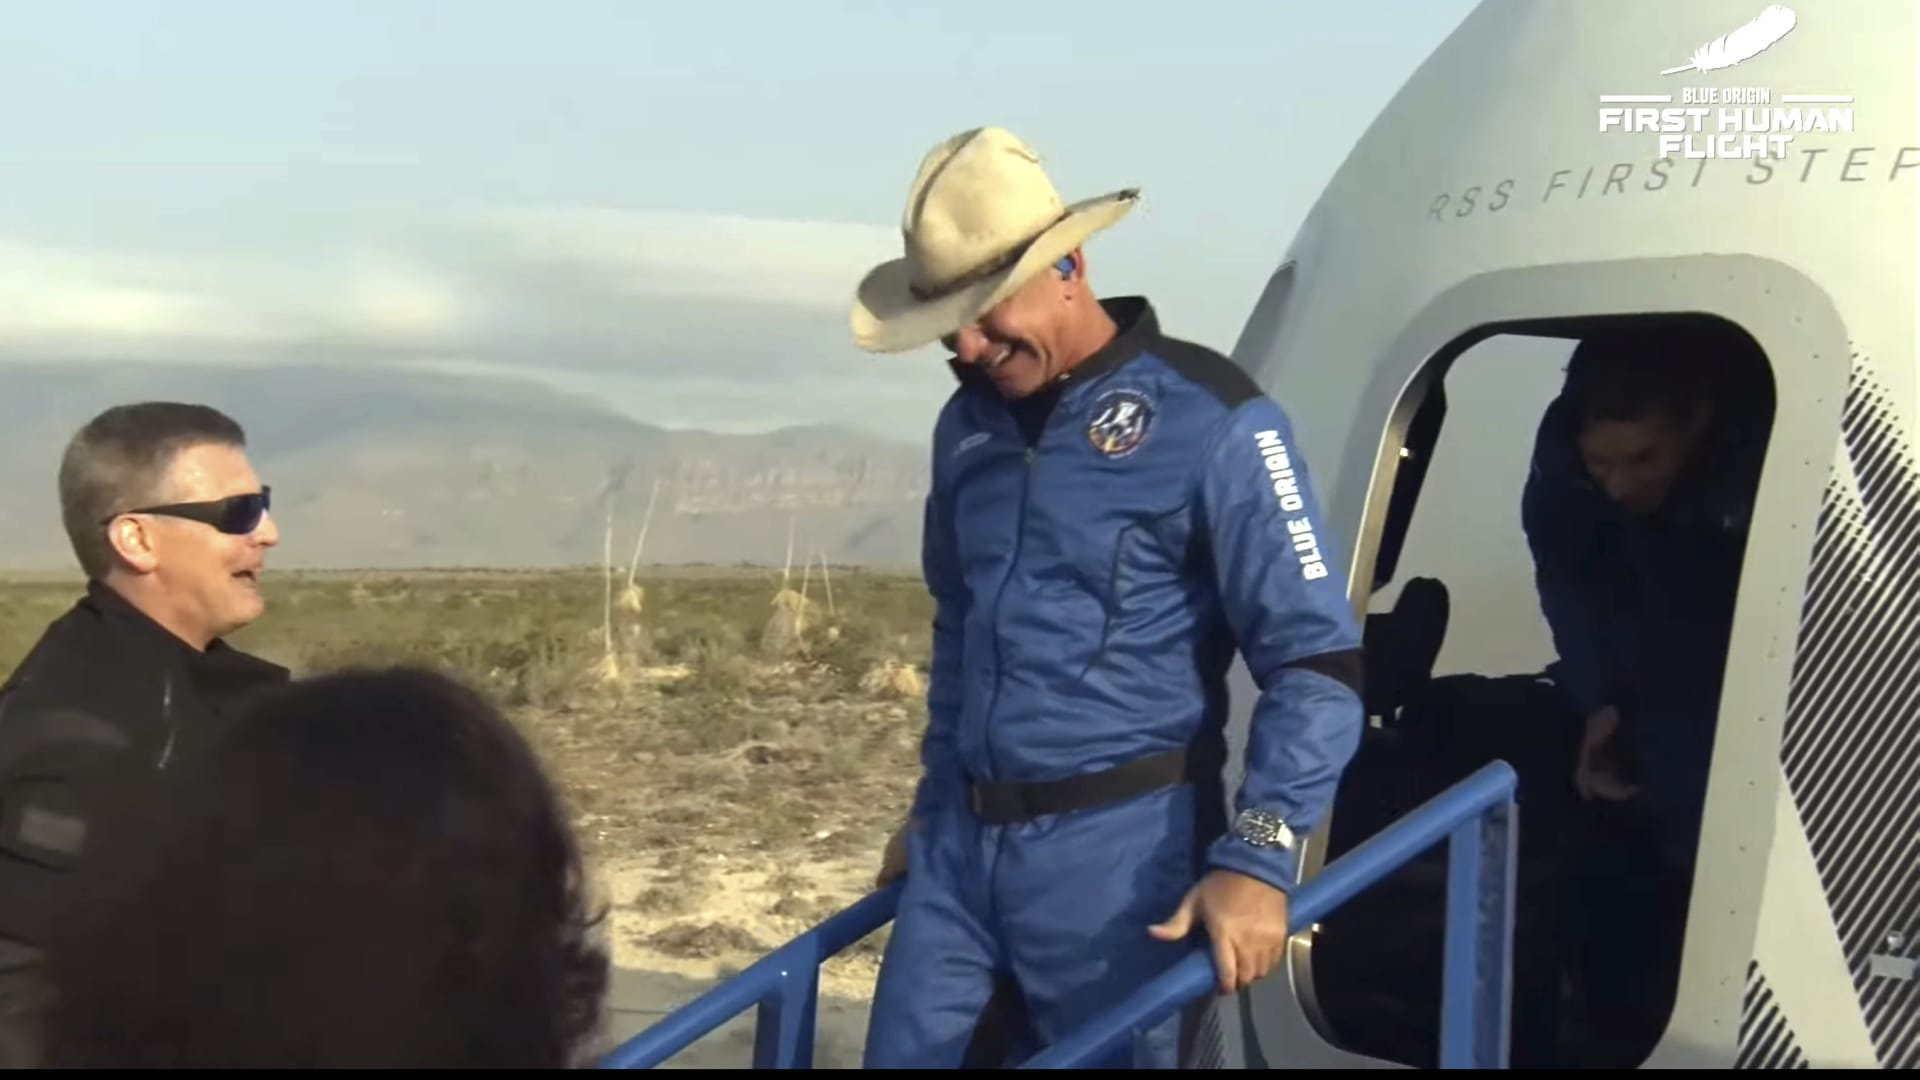 This photo provided by Blue Origin, Jeff Bezos, founder of Amazon and space tourism company Blue Origin, exits the Blue Origin's New Shepard capsule after it parachuted safely down to the launch area with passengers Mark Bezos, Oliver Daemen and Wally Funk, near Van Horn, Texas, Tuesday, July 20, 2021.